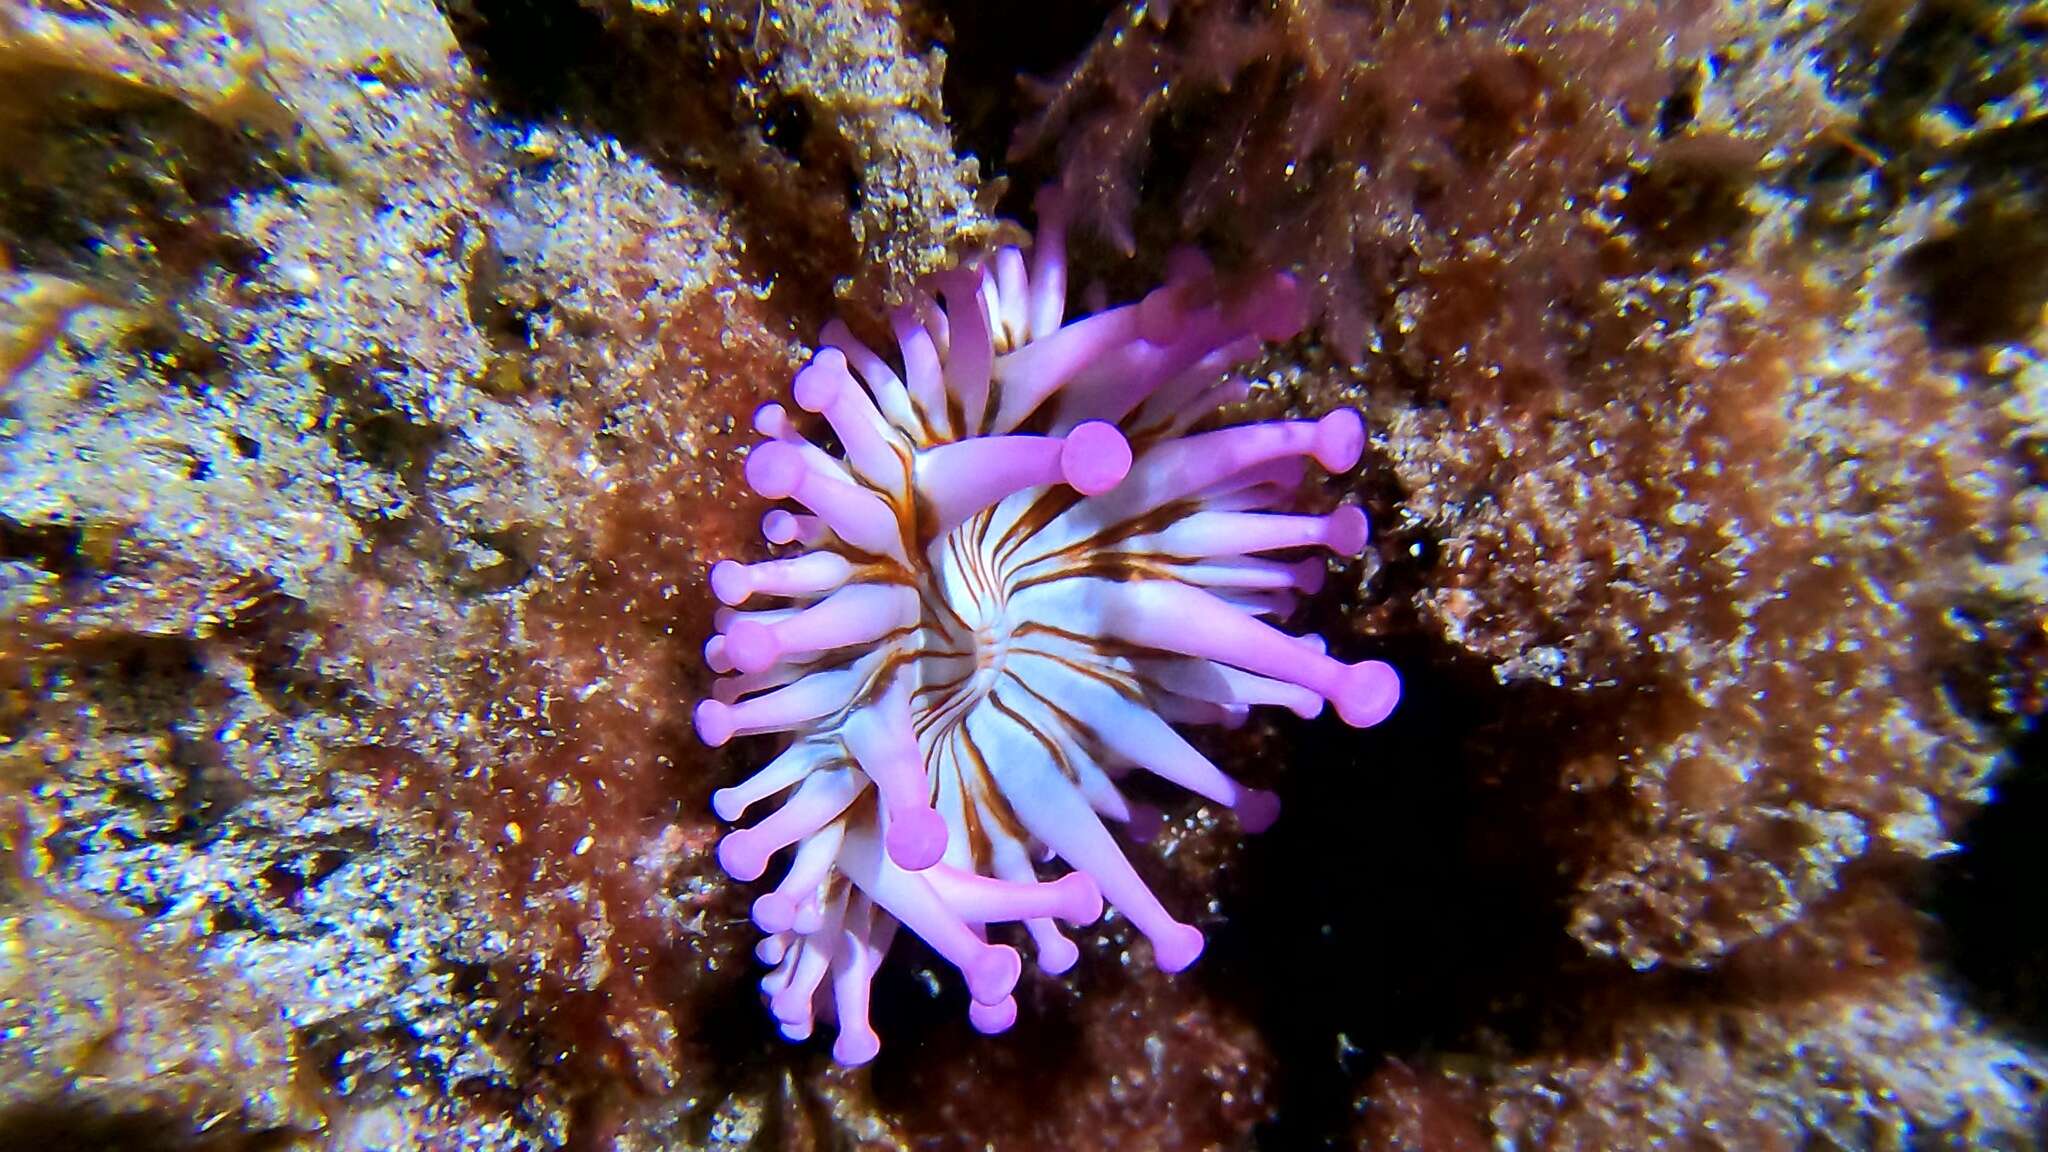 Image of blunt-tentacled anemone